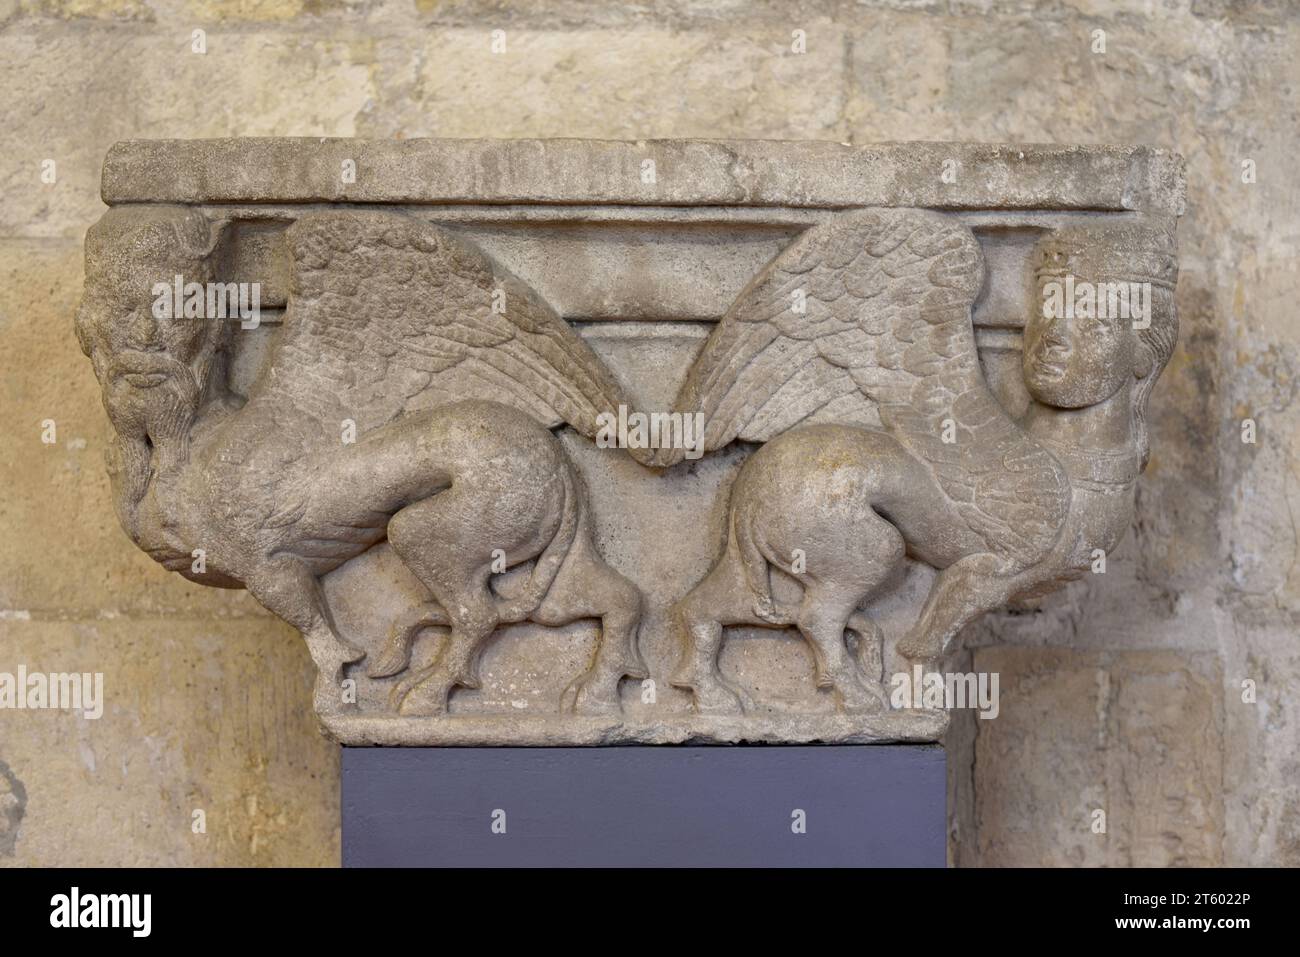 Stone Carved Capital Mythical Creatures Half-Human Half Beast Humans with Wings & Bovine or Donkey Body Cloisters Church Saint Trophime Arles France Stock Photo